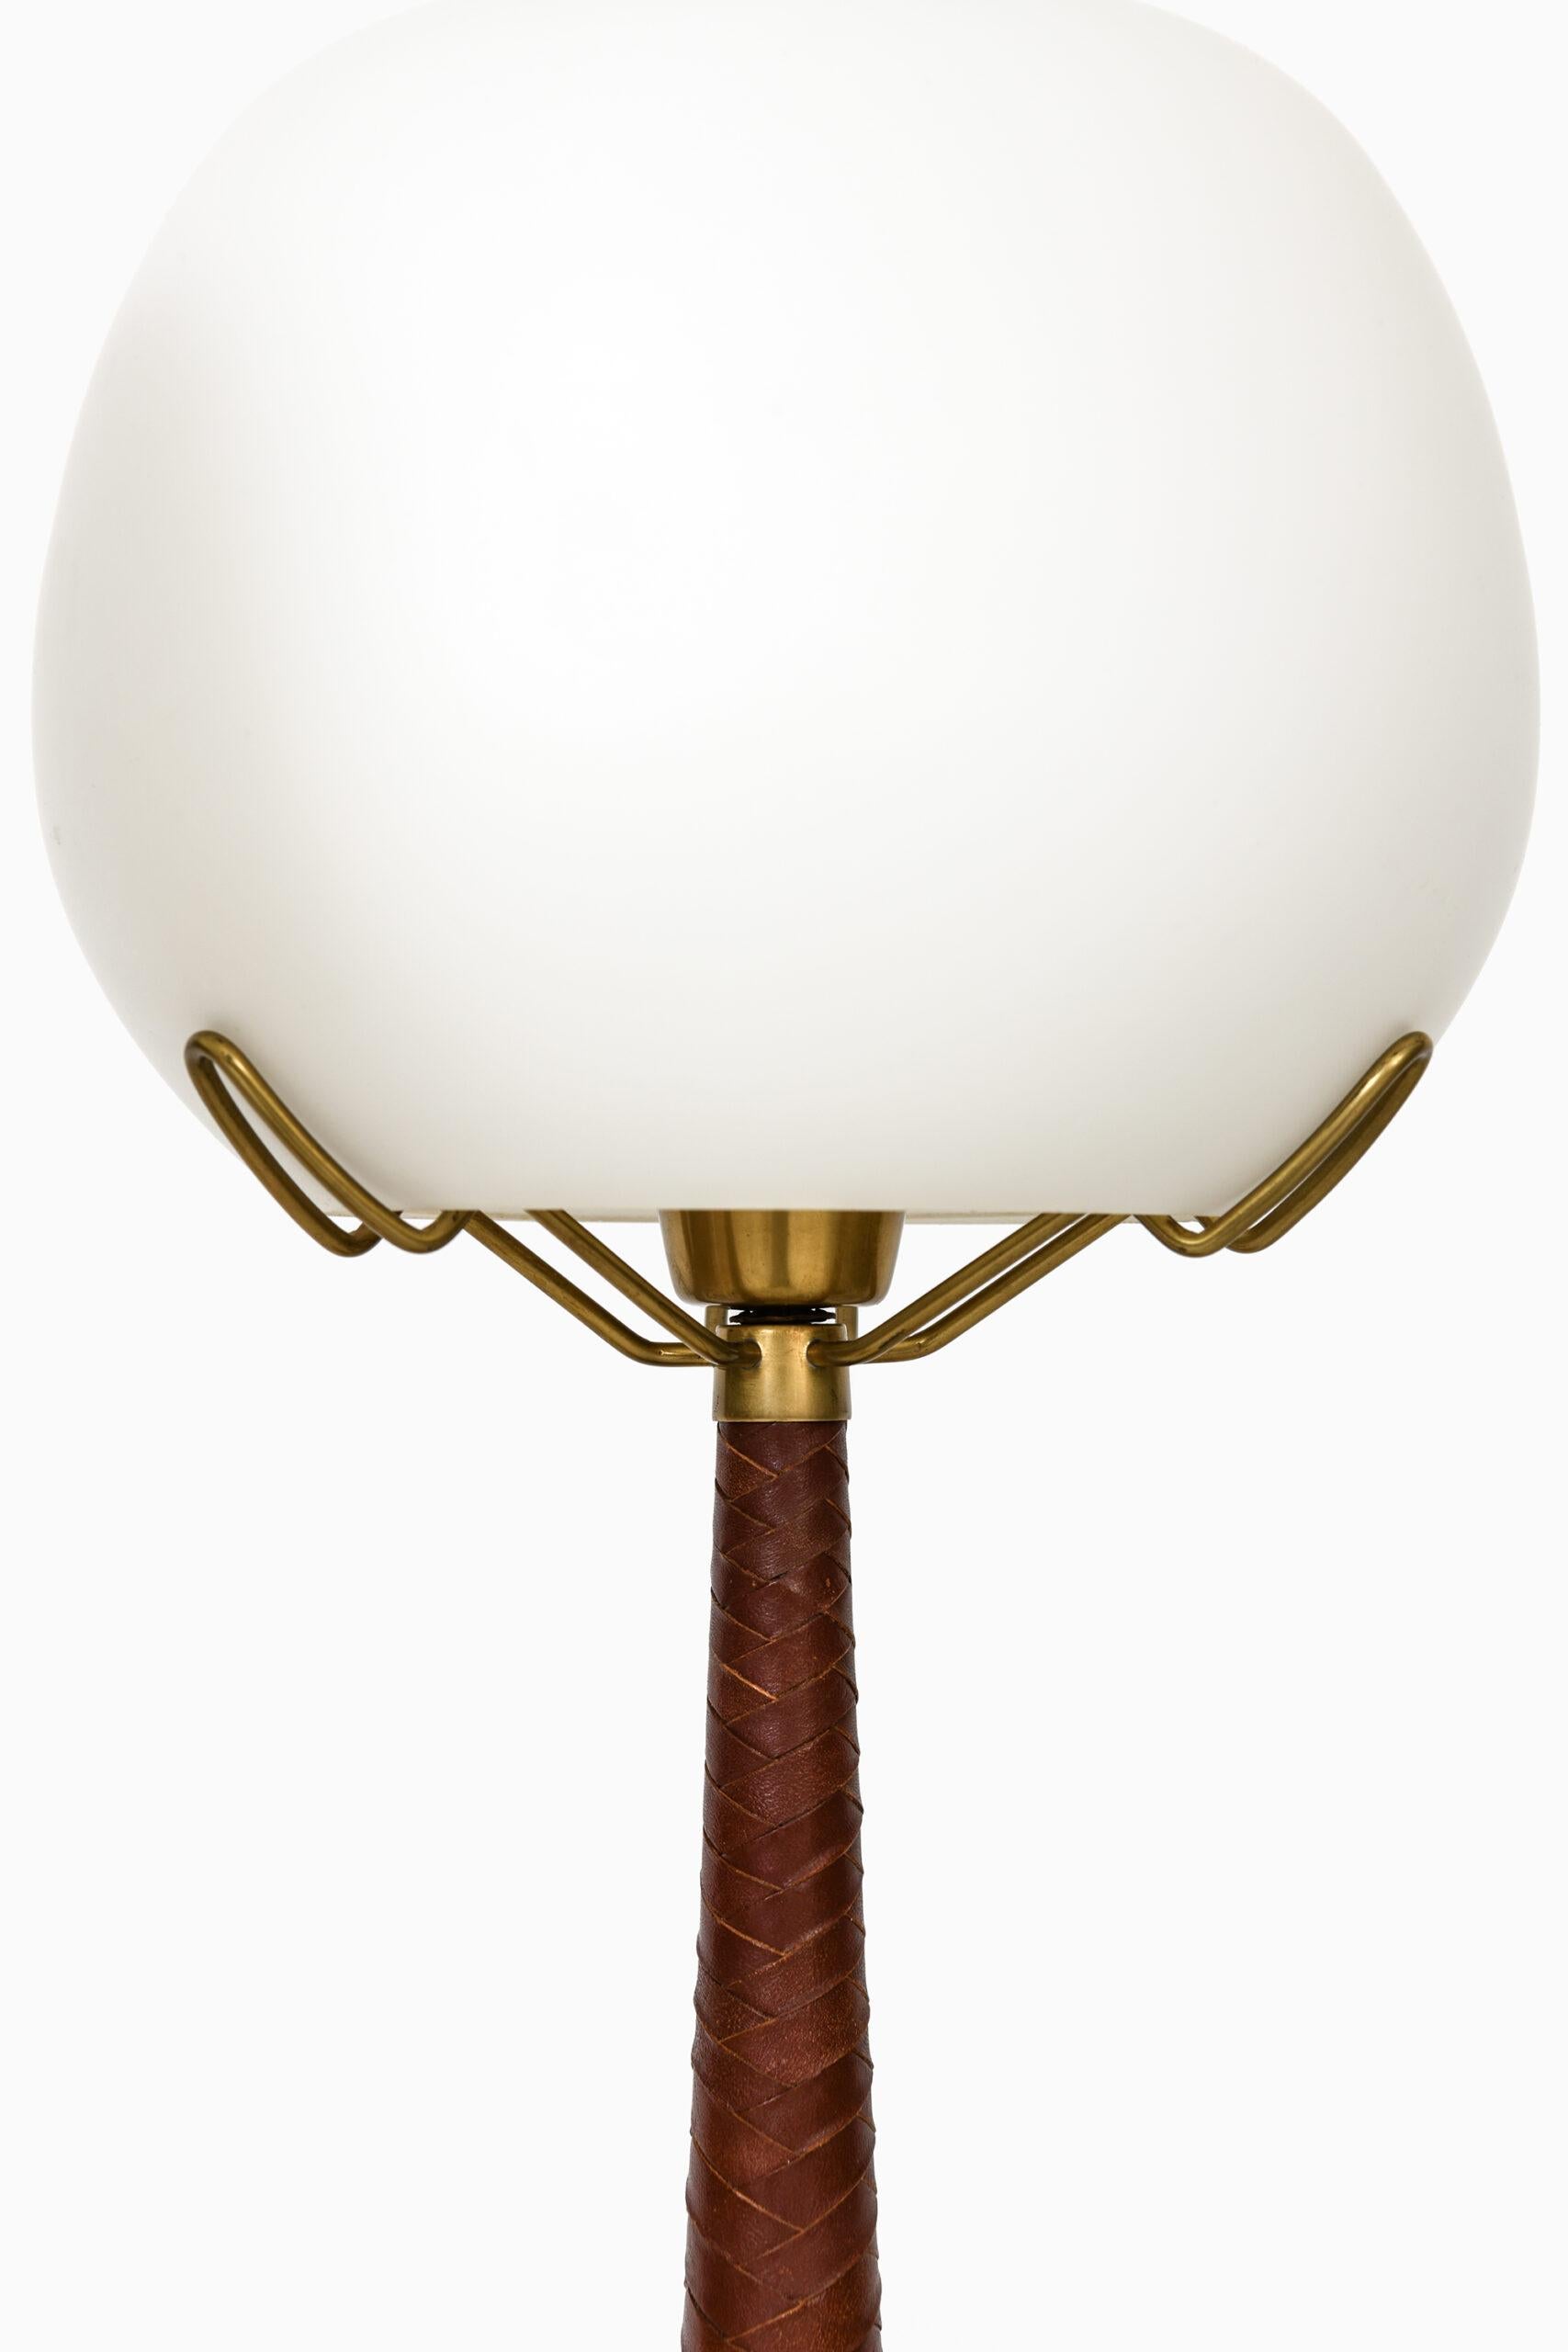 Rare pair of table lamps model 700 designed by Hans Bergström. Produced by Ateljé Lyktan in Åhus, Sweden.